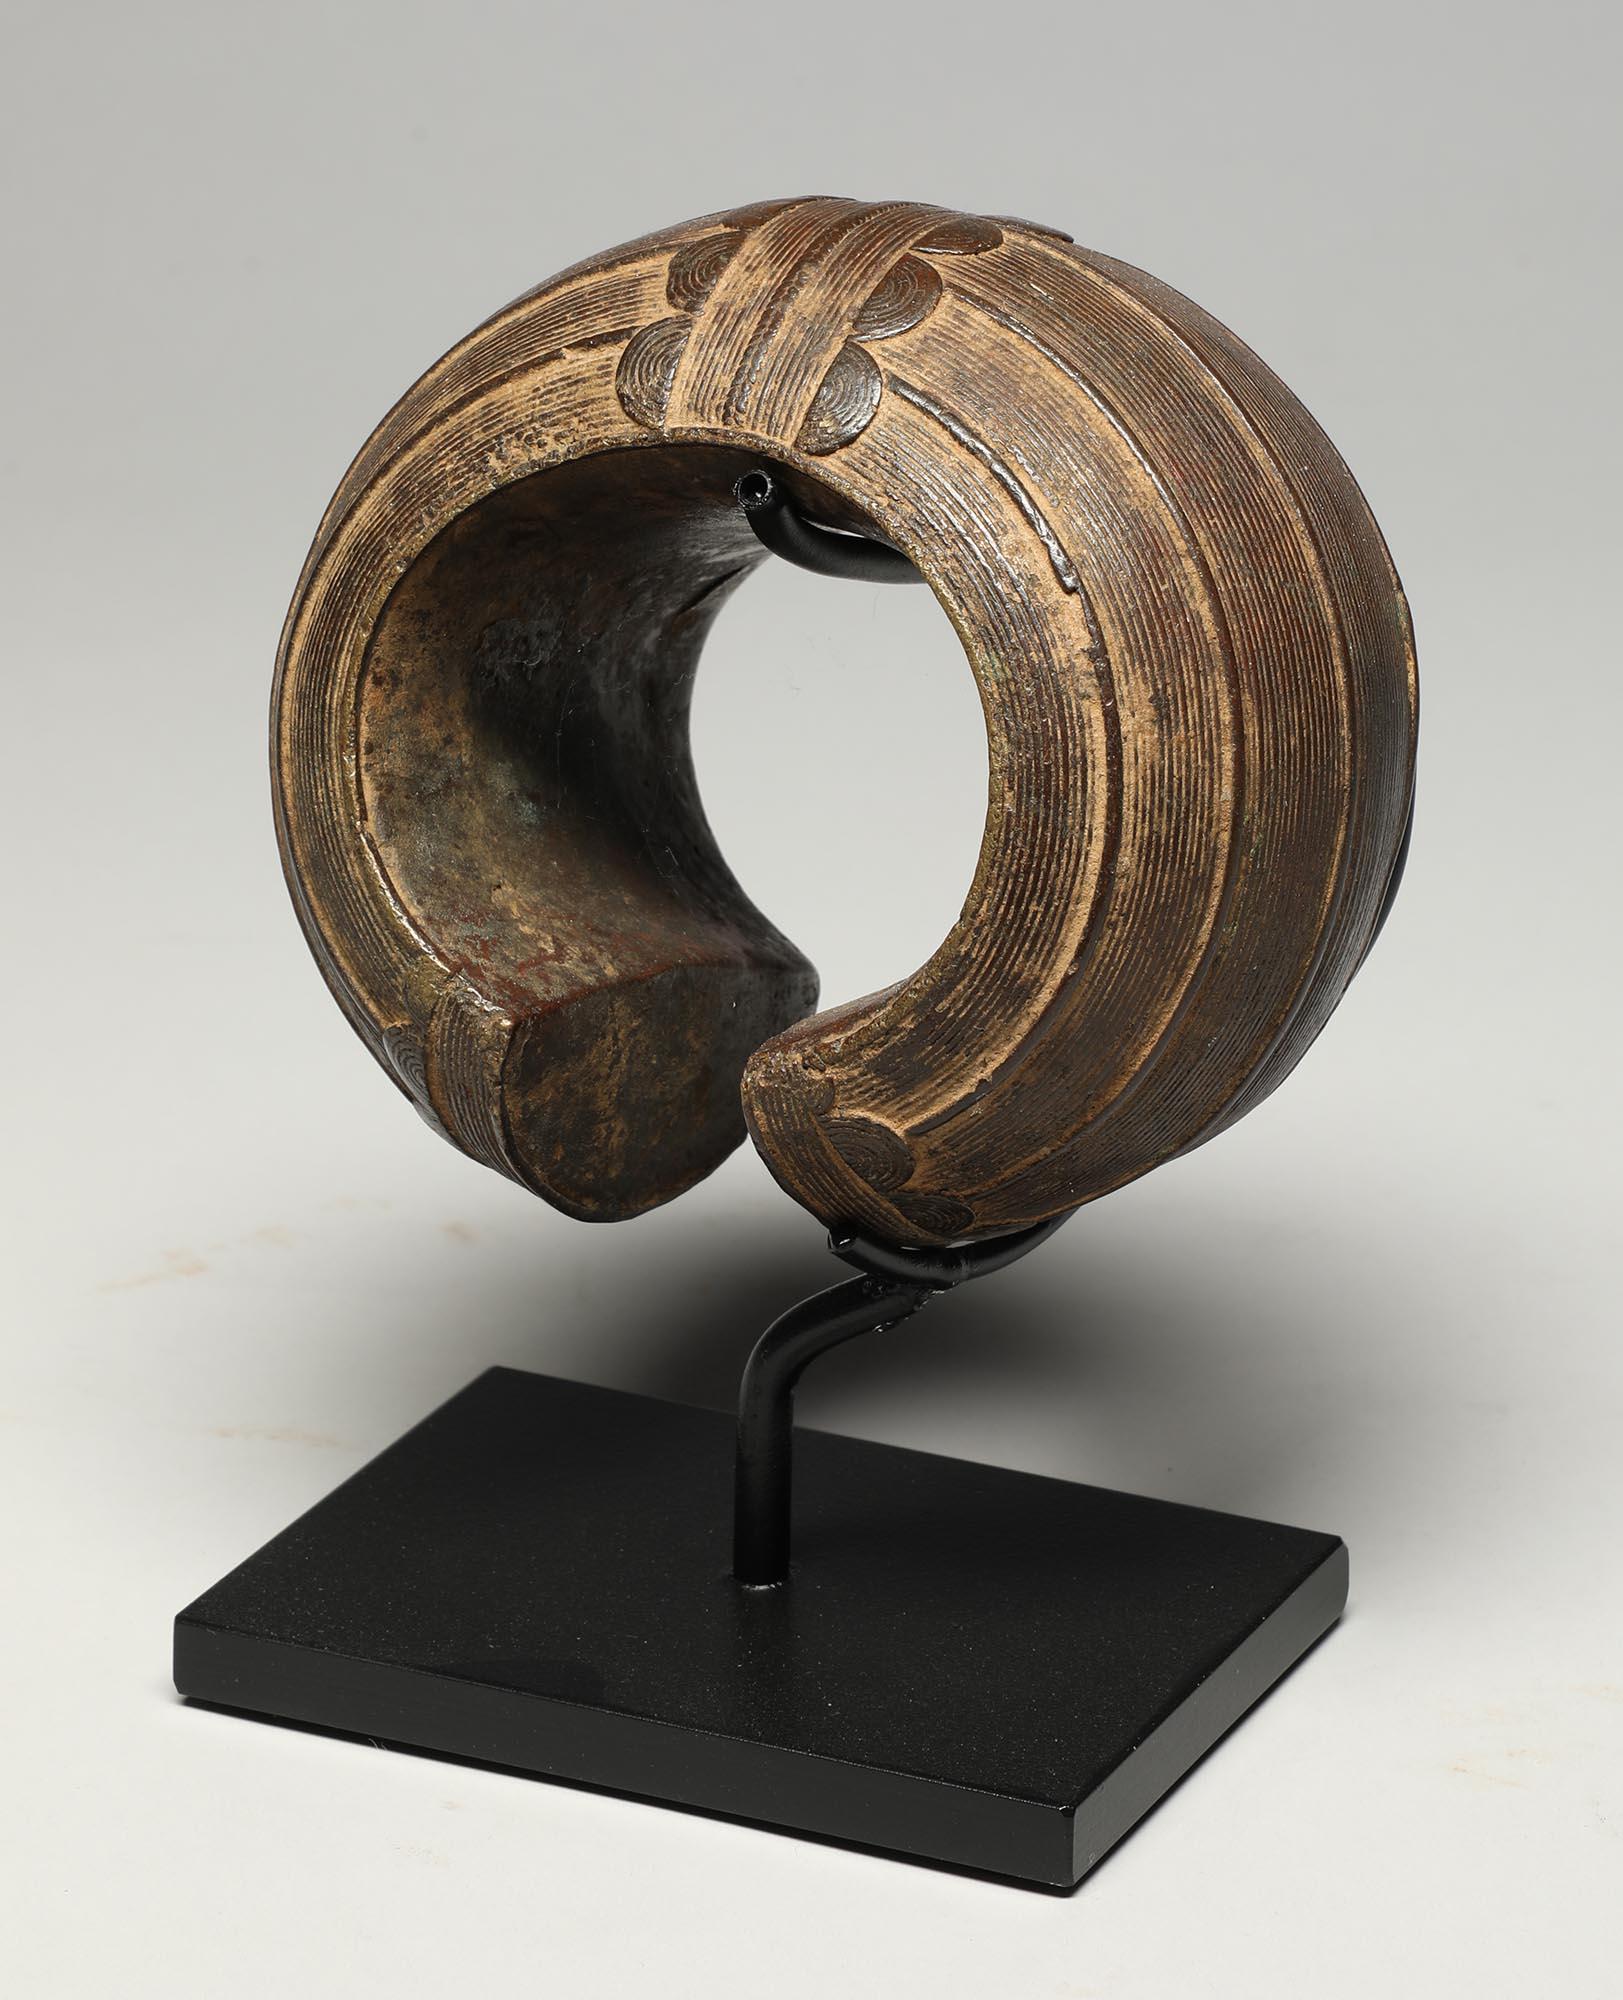 An early 20th century hollow cast bronze bracelet from the Baule of Cote d'Ivoire. Beautiful cast geometric design around outside, smooth from wear inside. On custom metal base, 5 inches high.